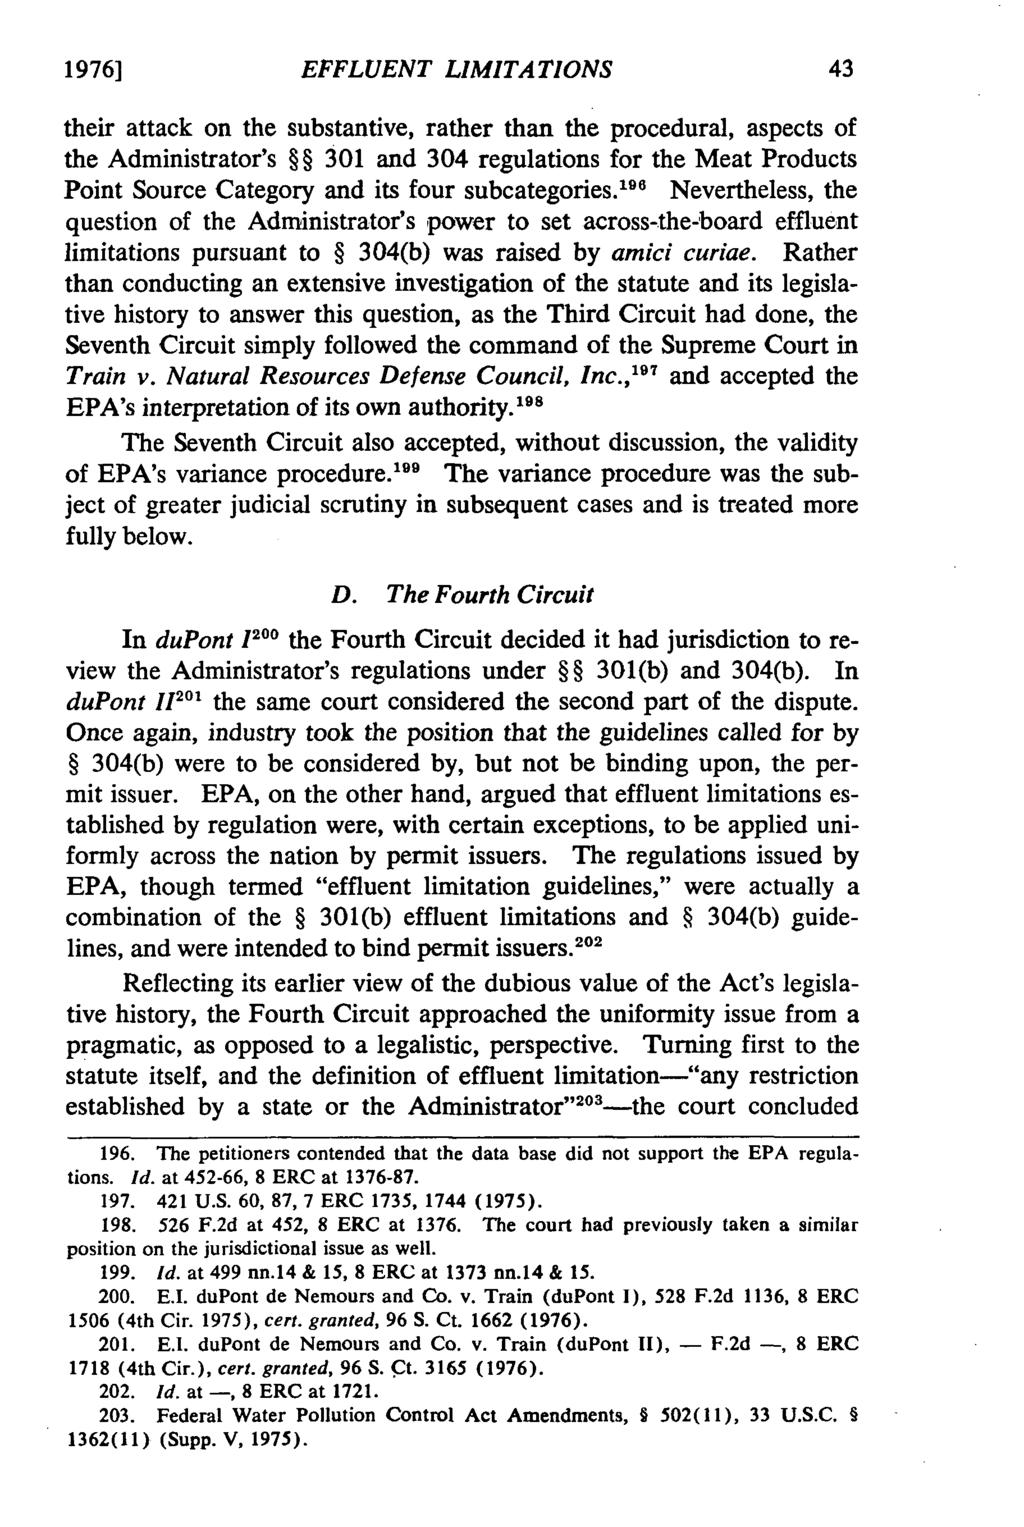 1976] EFFLUENT LIMITATIONS their attack on the substantive, rather than the procedural, aspects of the Administrator's 301 and 304 regulations for the Meat Products Point Source Category and its four